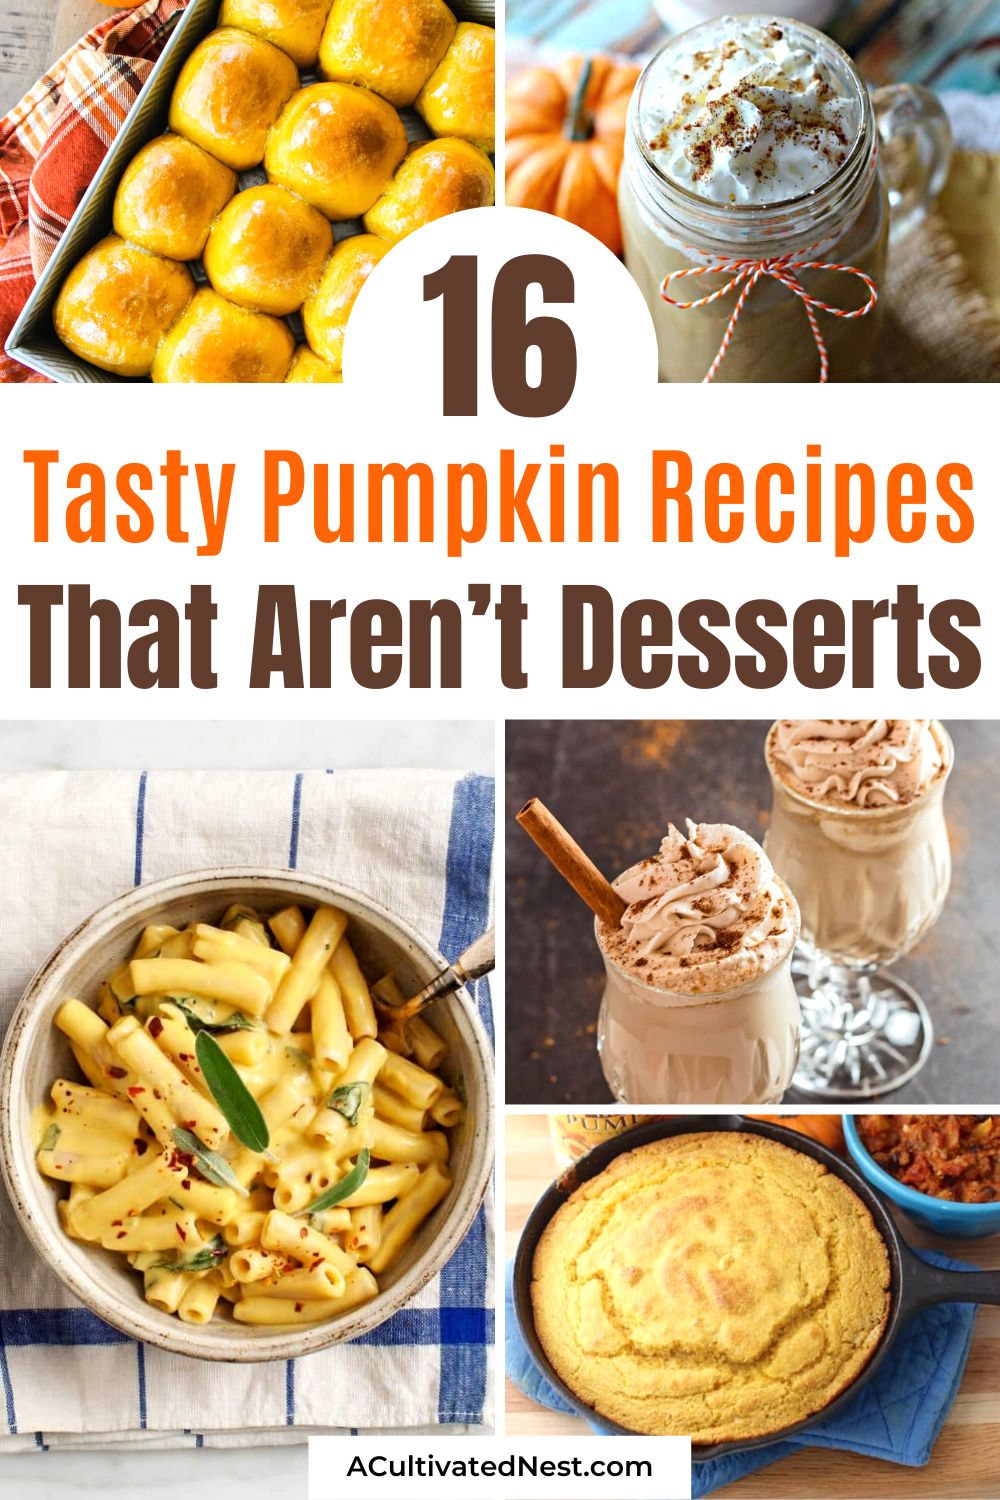 16 Delicious Pumpkin Recipes That Aren't Desserts- Craving more than just pumpkin spice? These savory pumpkin dishes are the answer! Discover delightful pumpkin recipes to infuse your fall with a burst of pumpkin flavor – perfect for cozy dinners and gatherings. | #dinnerRecipes #pumpkin #Thanksgiving #recipeIdeas #ACultivatedNest